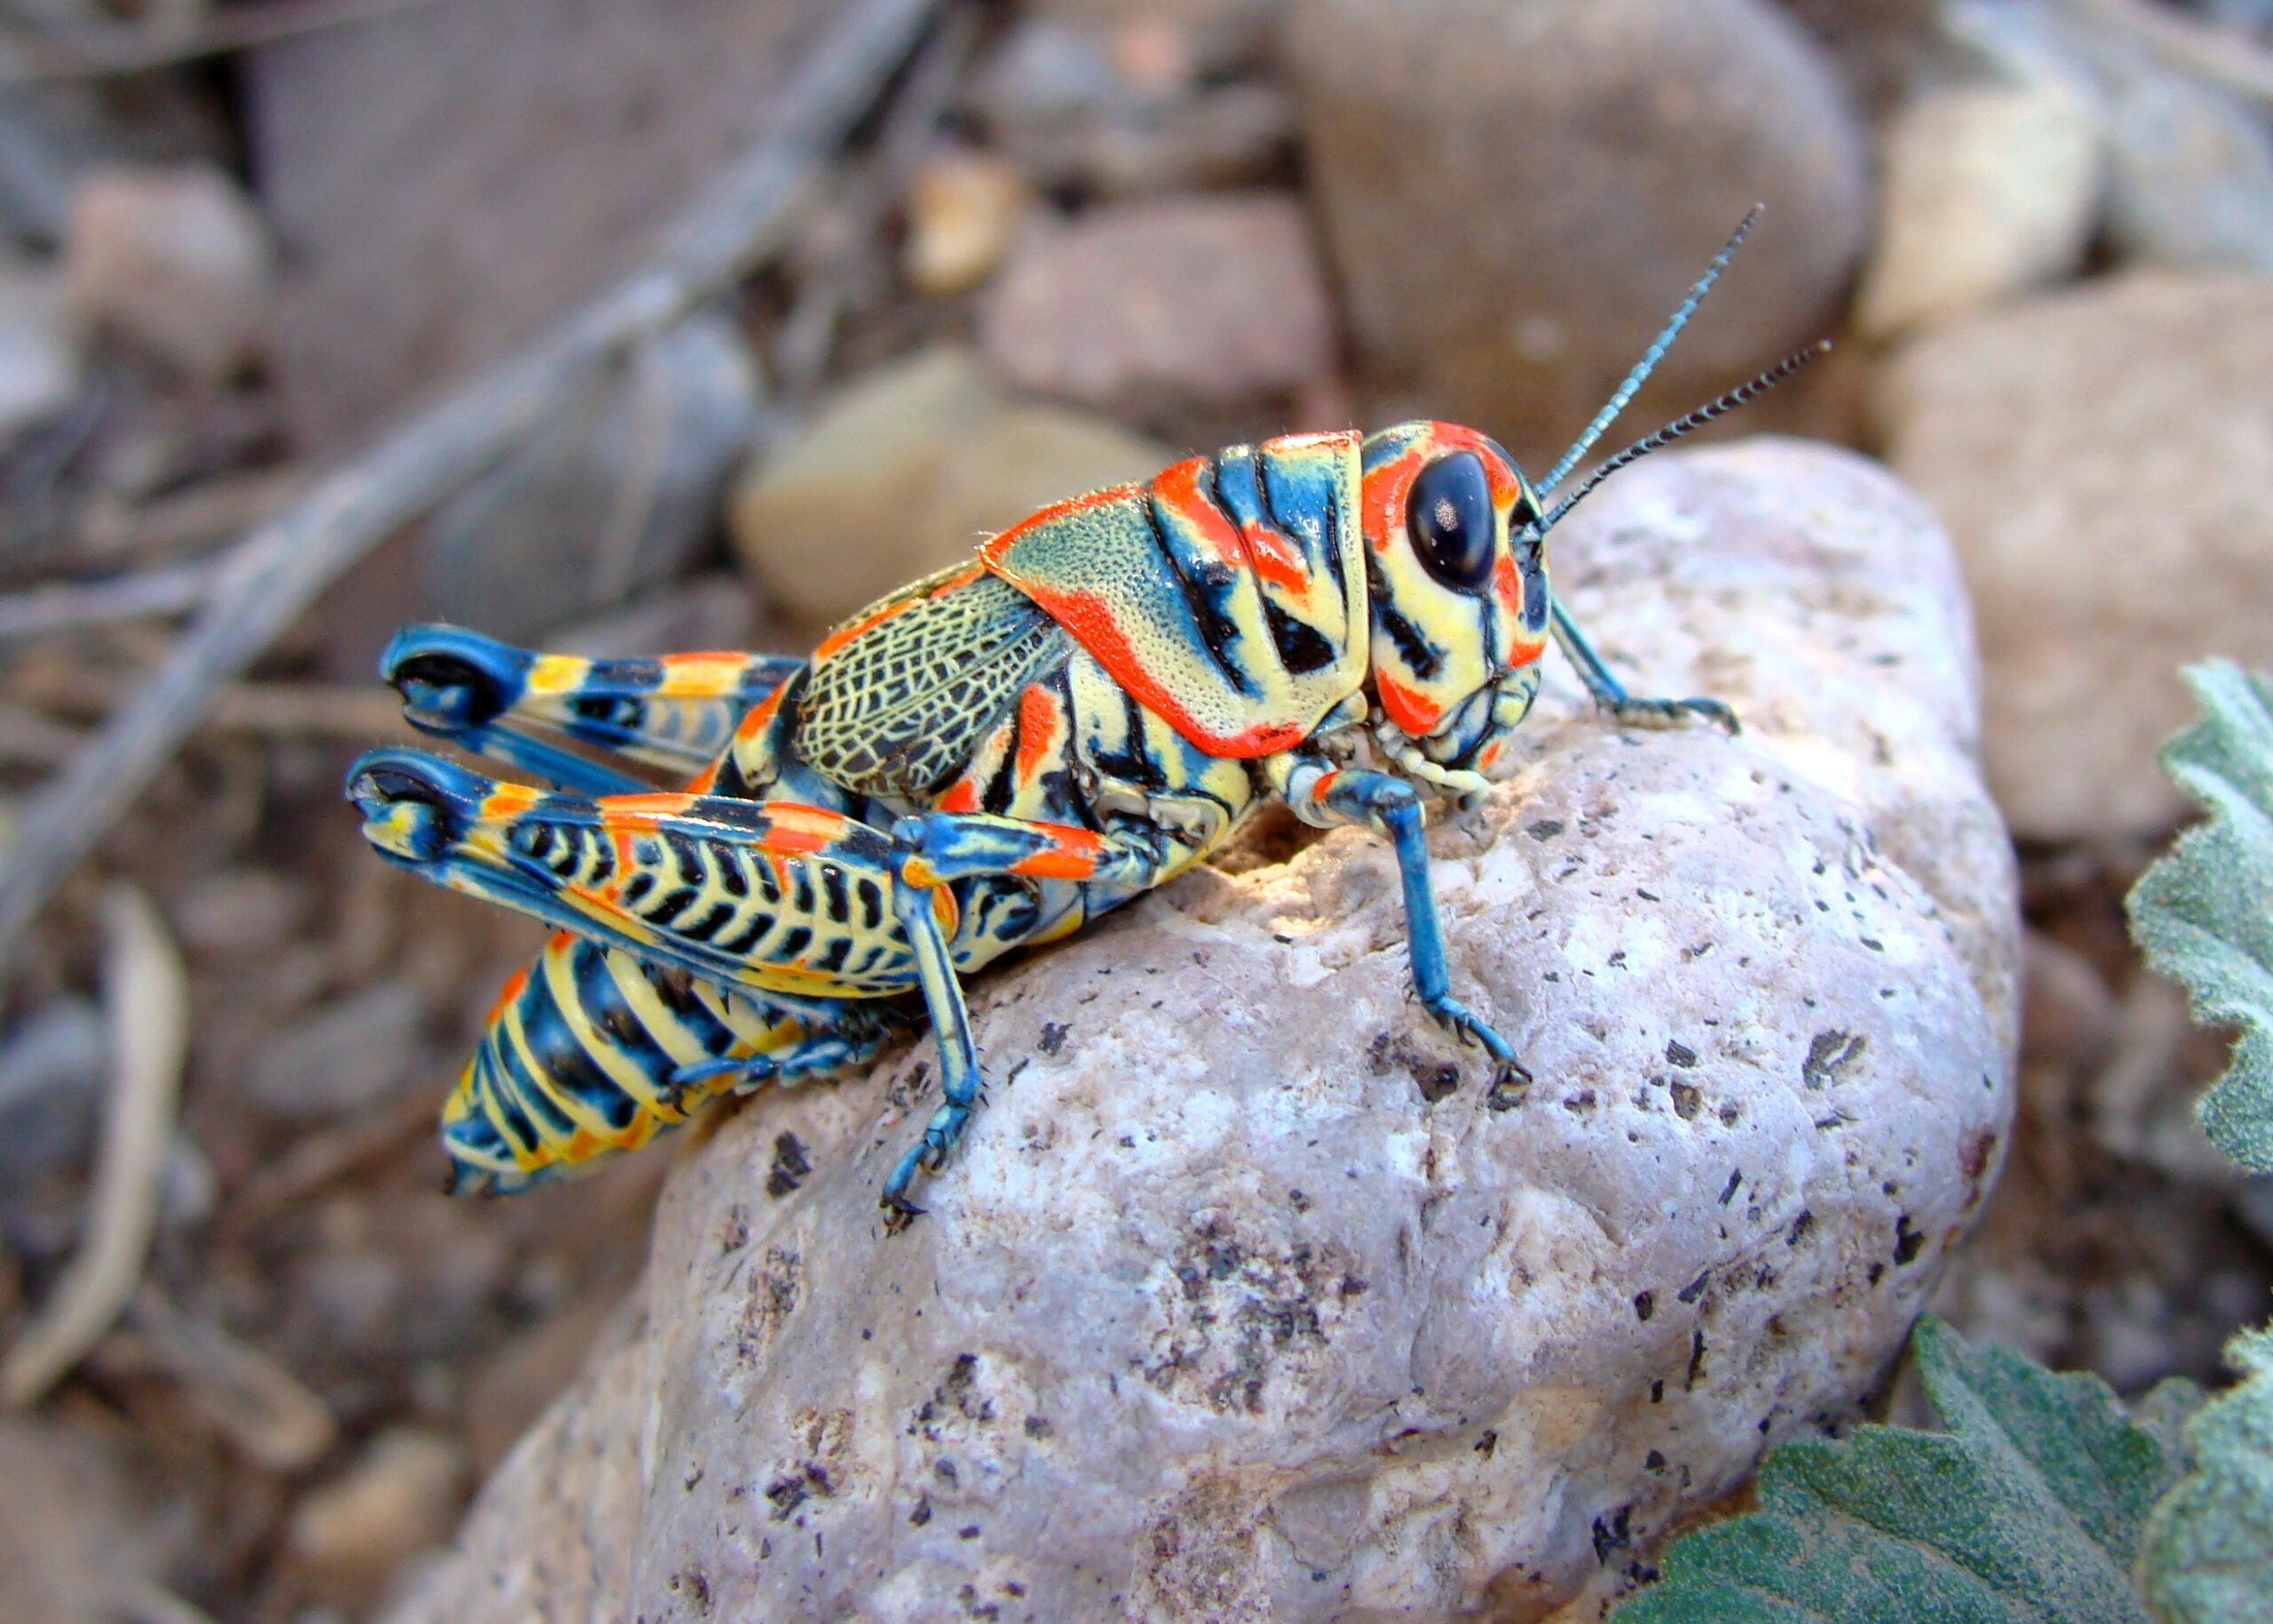 A vibrant and colorful Rainbow Grasshopper, also known as Dactylotum, captured in a photo showcasing its bright hues of red, yellow, green, and blue. The grasshopper is shown perched on a rock with its long hind legs and antennae clearly visible.